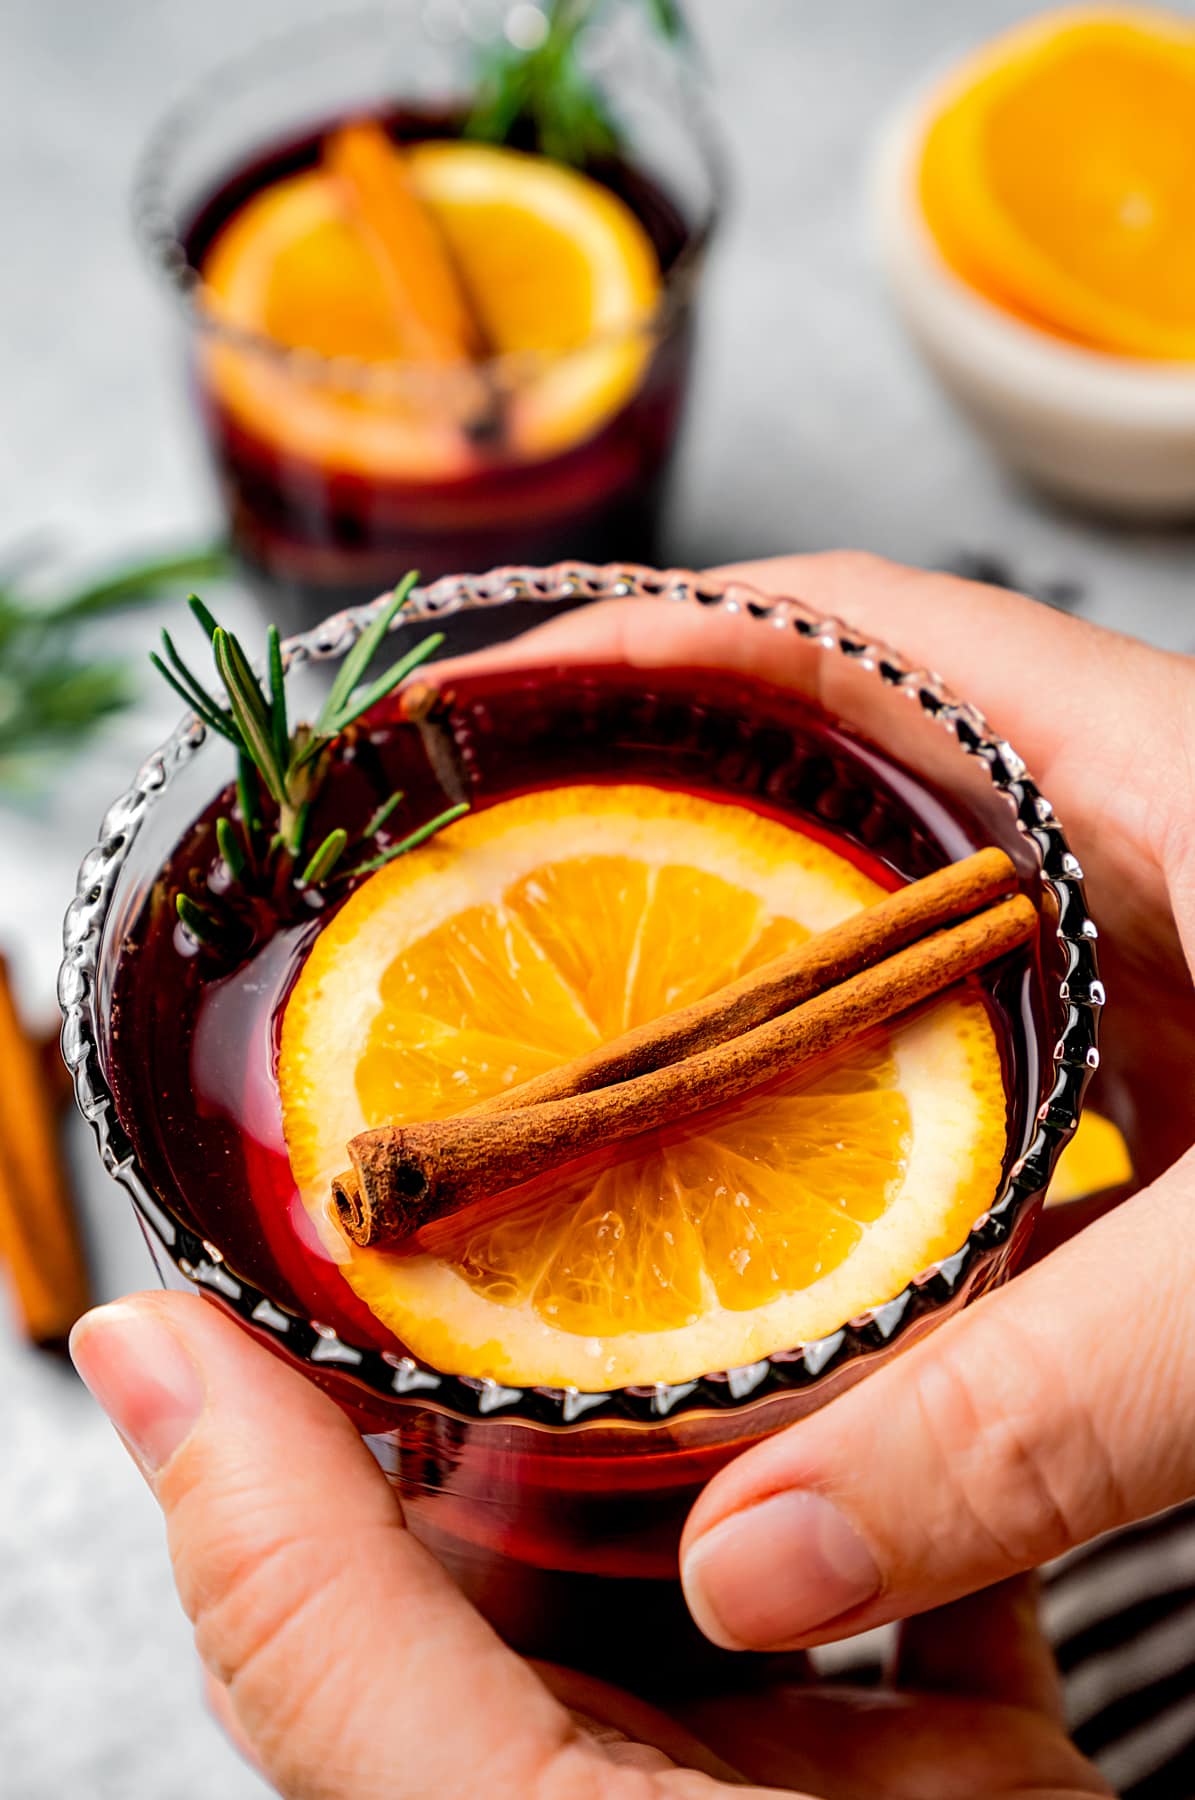 Hands wrapped around a glass of mulled wine garnished with an orange slice and a cinnamon stick.